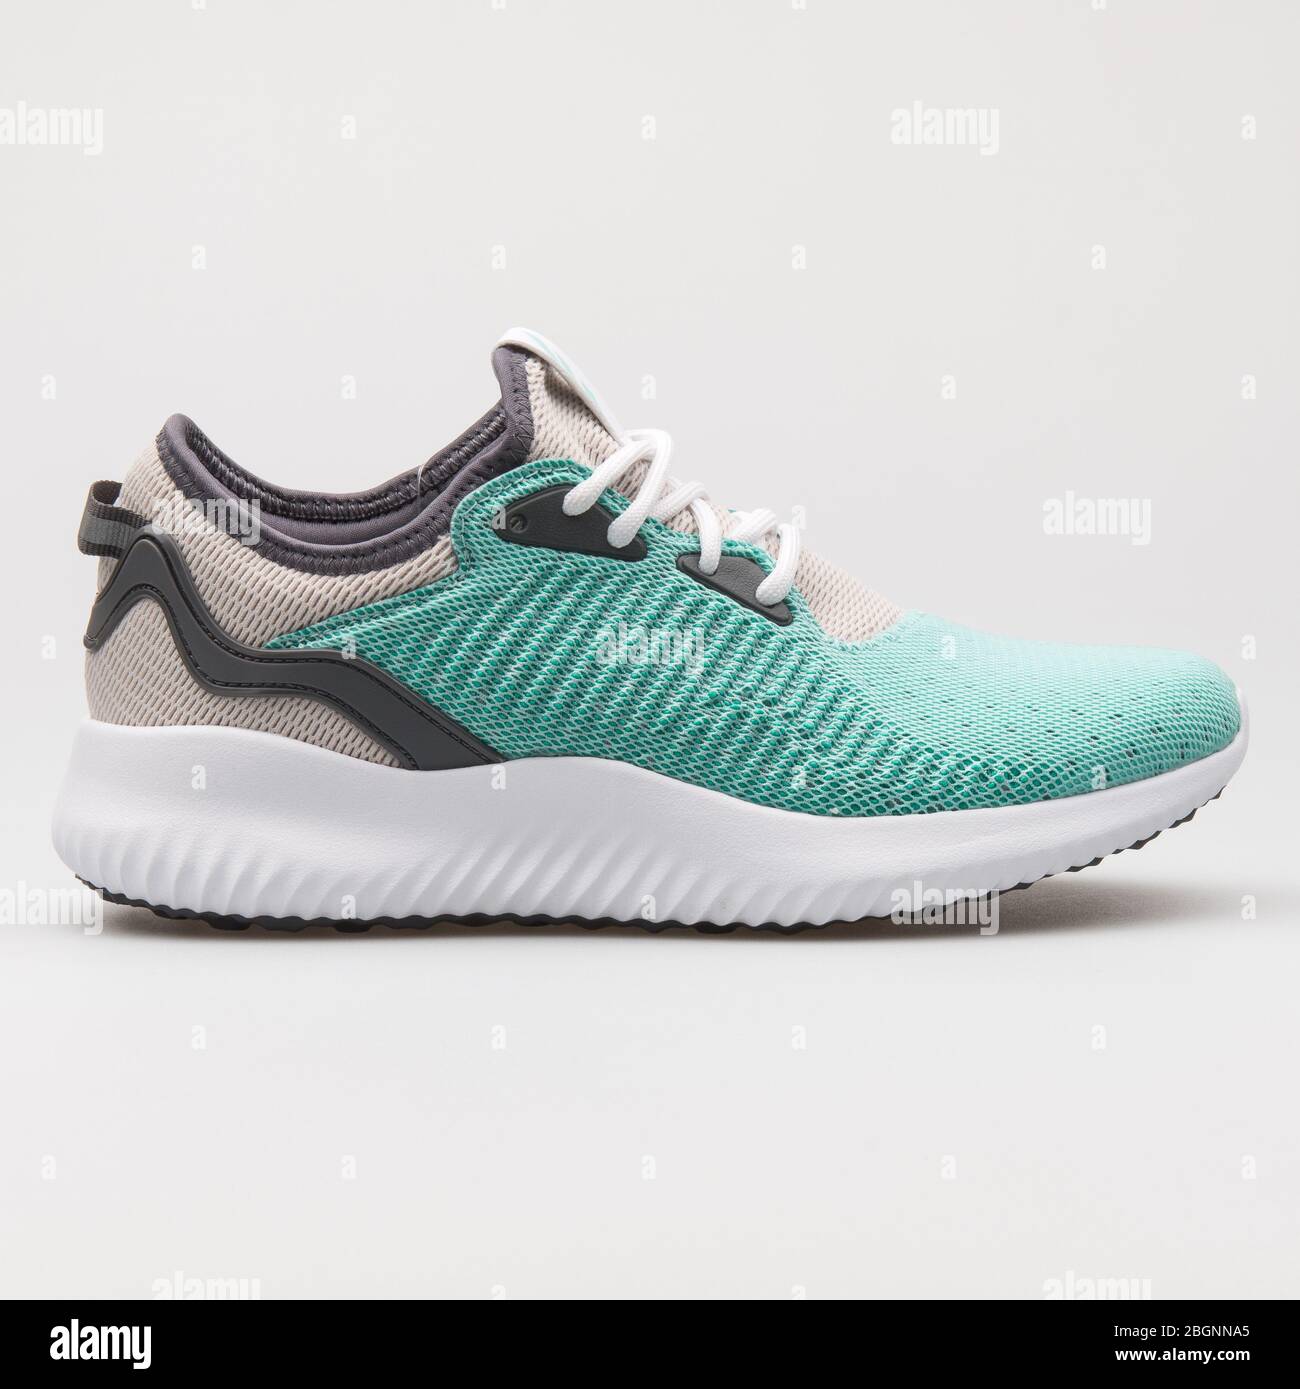 VIENNA, AUSTRIA - AUGUST 16, 2017: Adidas Alphabounce Lux green, beige and  white sneaker on white background Stock Photo - Alamy